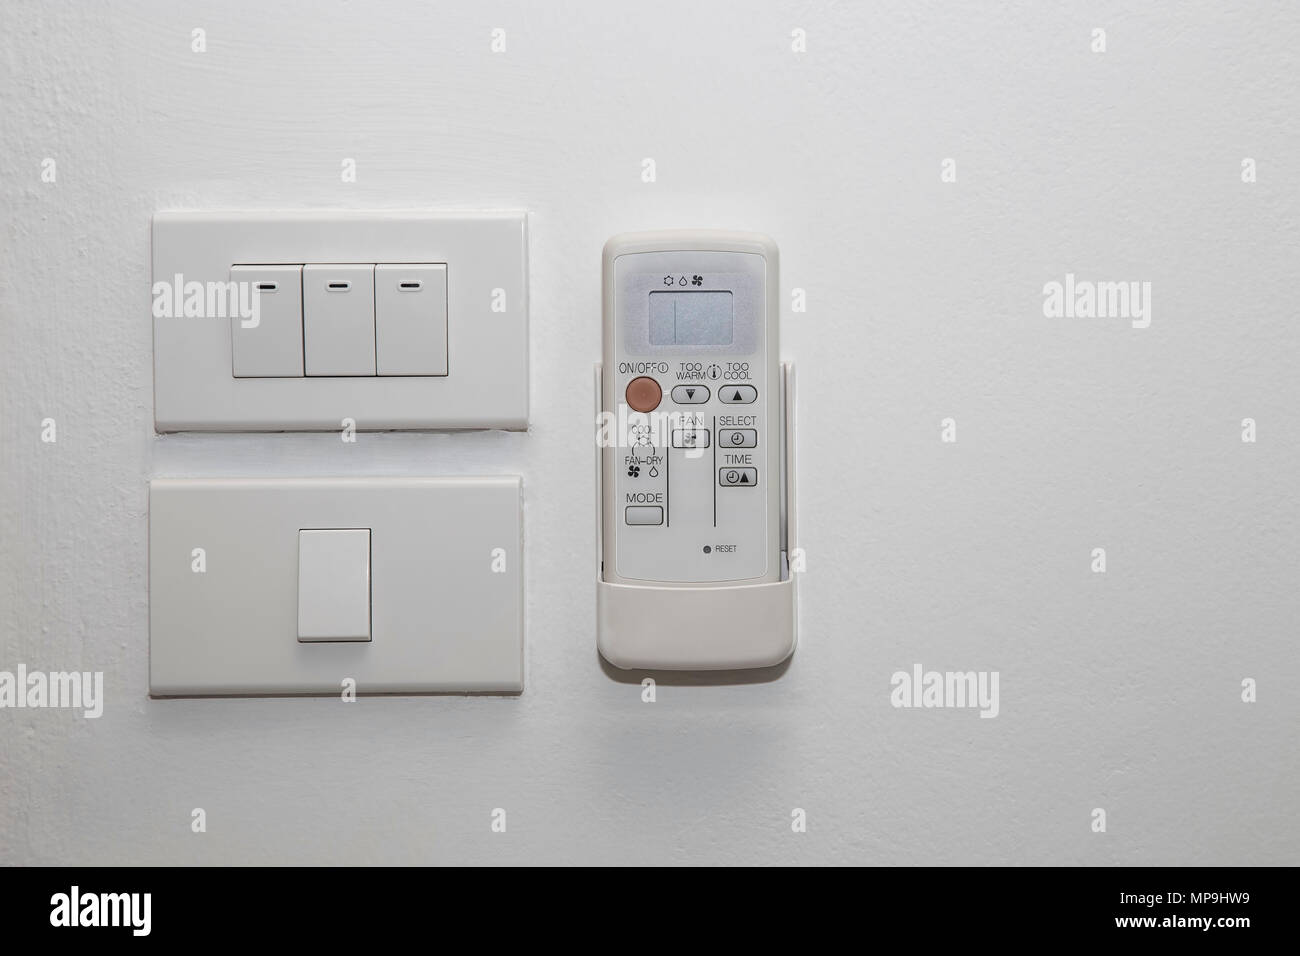 Light switch and remote control for air conditioner Stock Photo